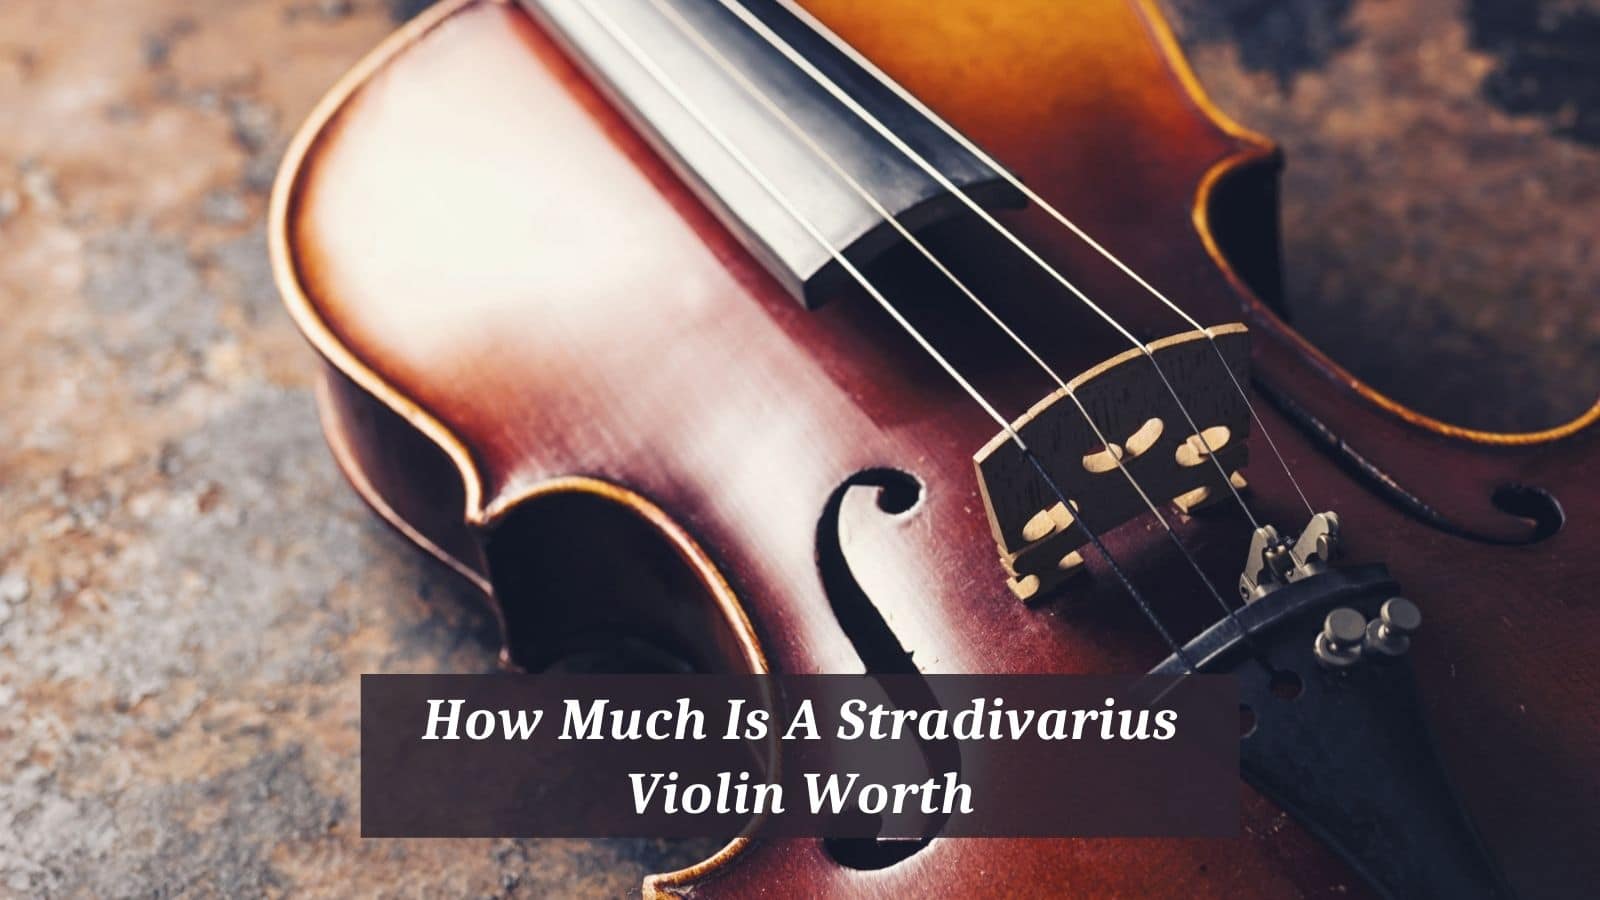 How Much Is A Stradivarius Violin Worth